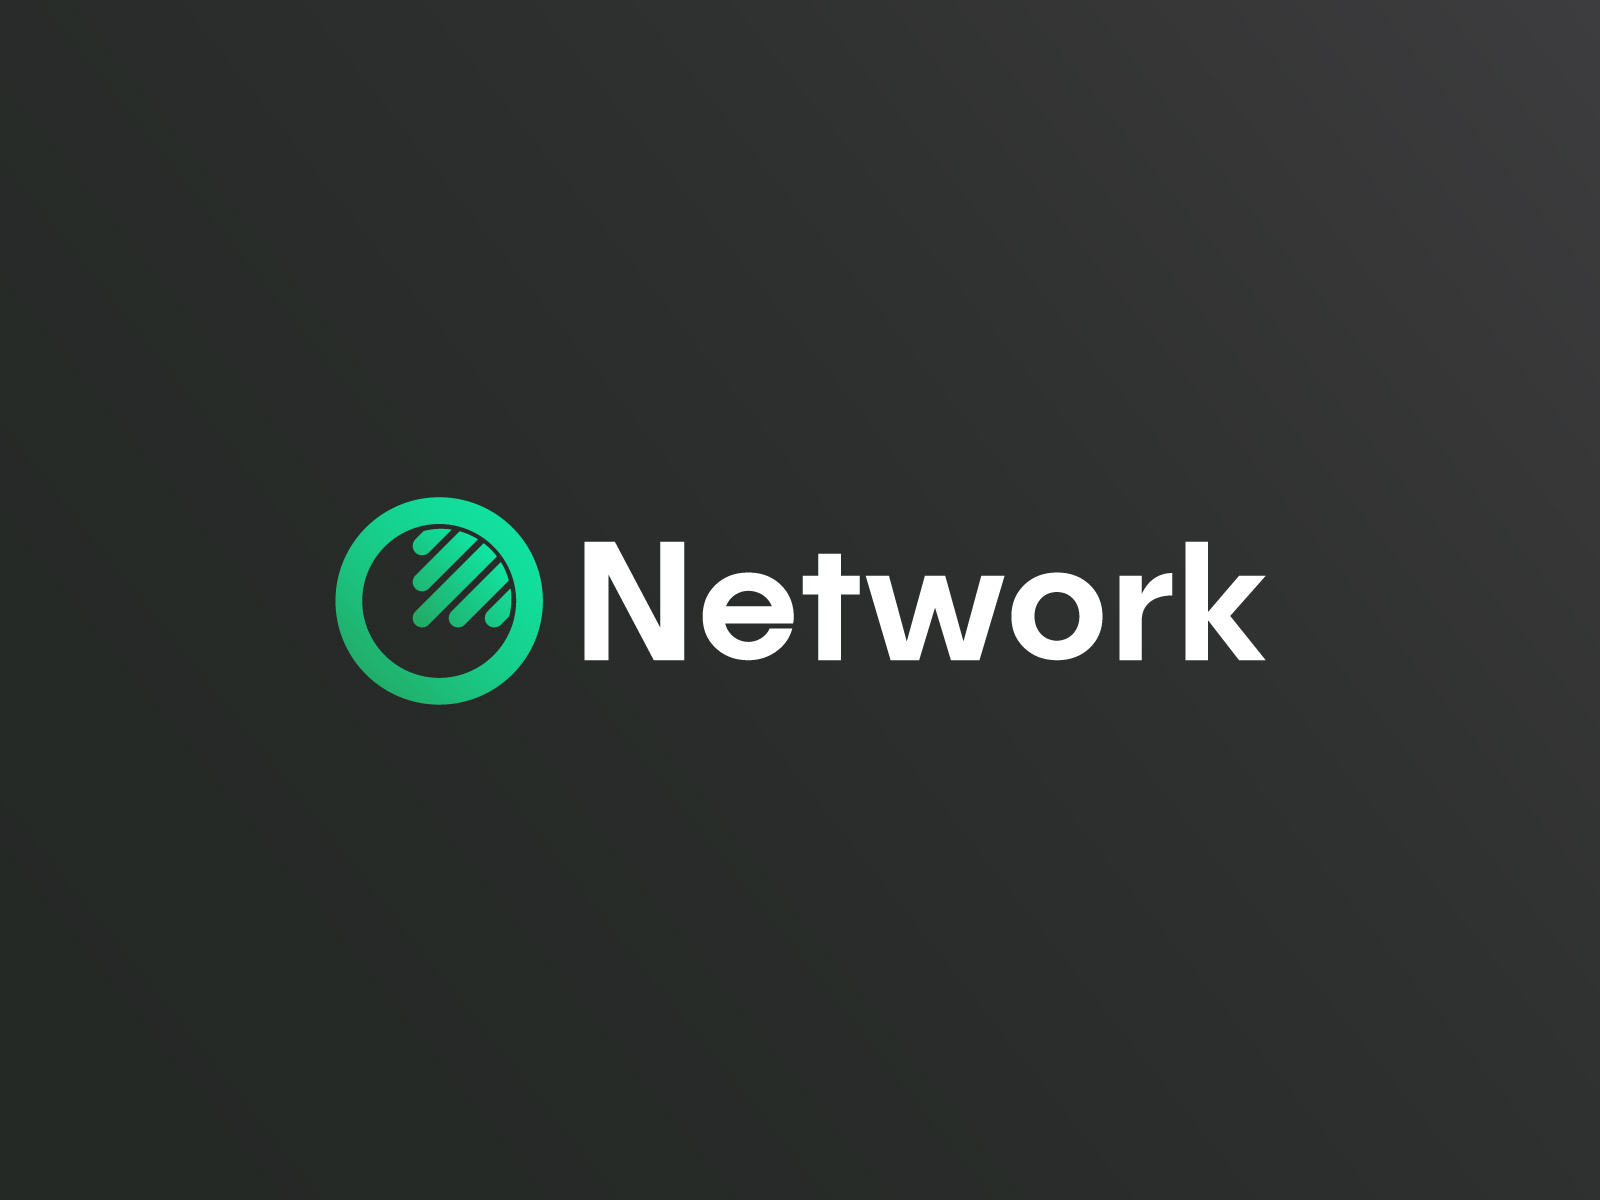 Network Logo Mark by Md Mehedi Hasan for Fixdpark on Dribbble